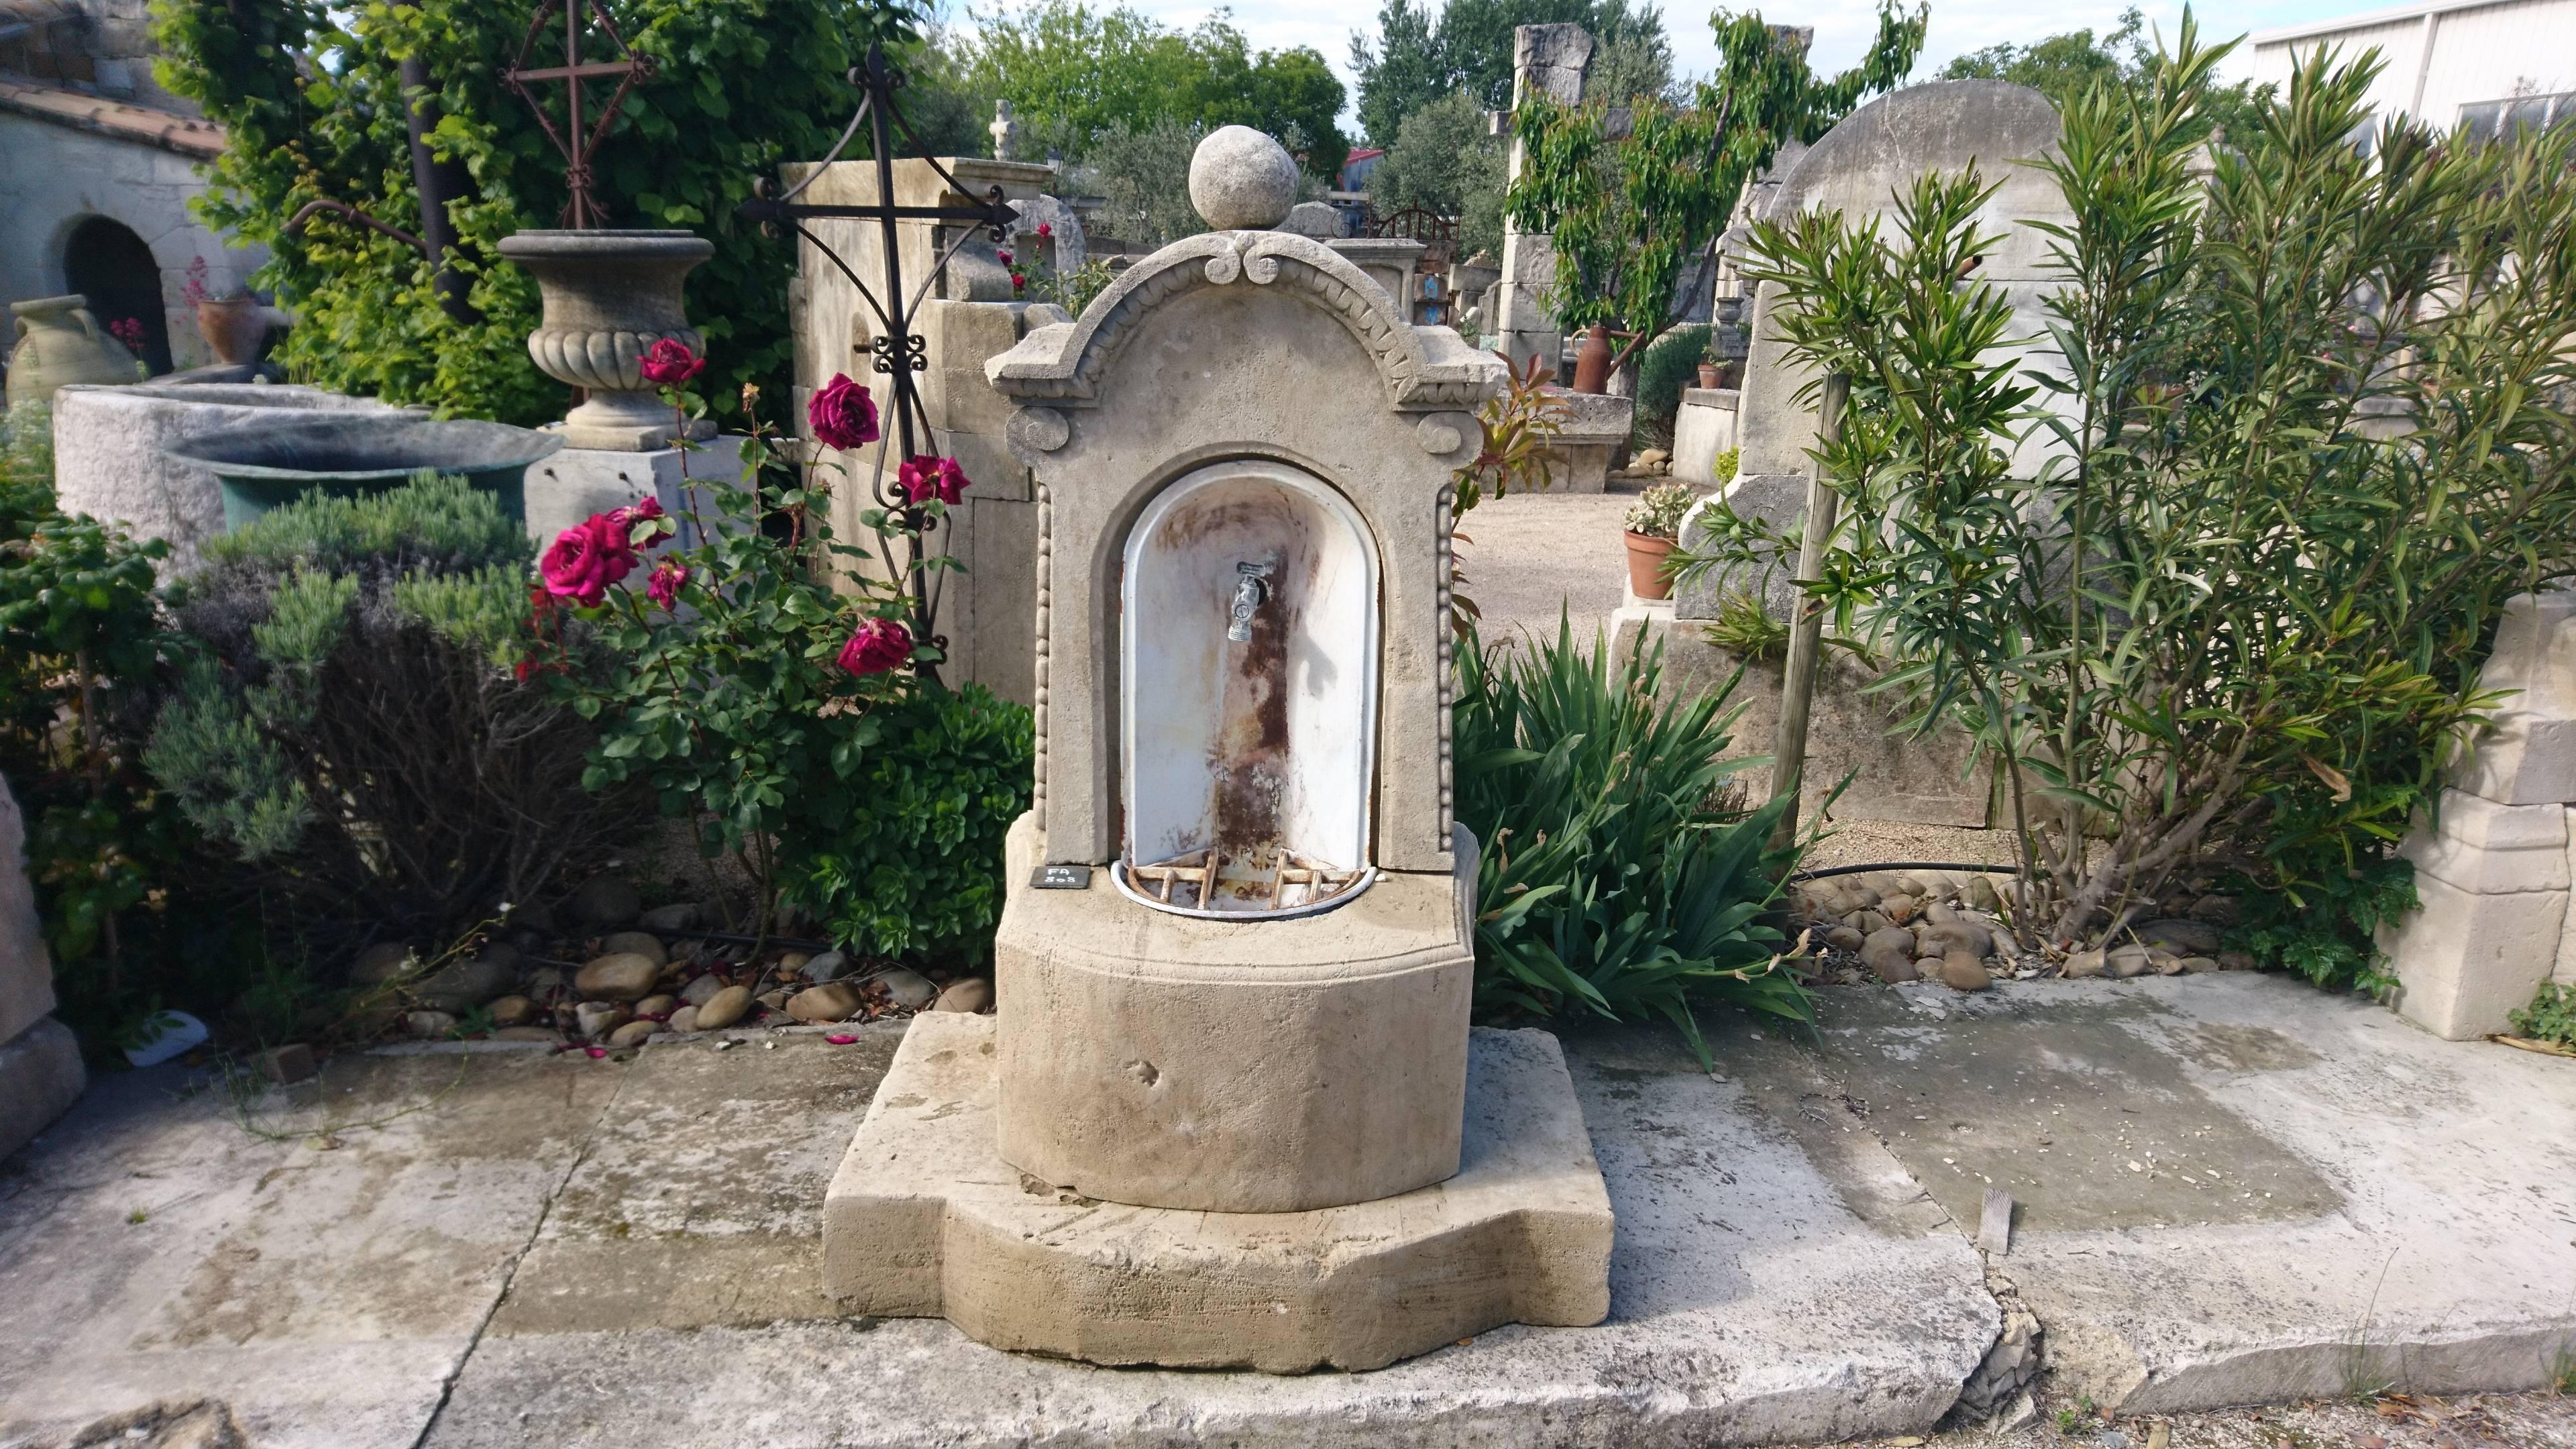 Charming little garden water fountain entirely composed of authentic antique materials !

This wall-mounted water fountain presents a thick rounded stone base, a solid monolithic circular basin, an elegant sculpted stone pediment, a curved cornice